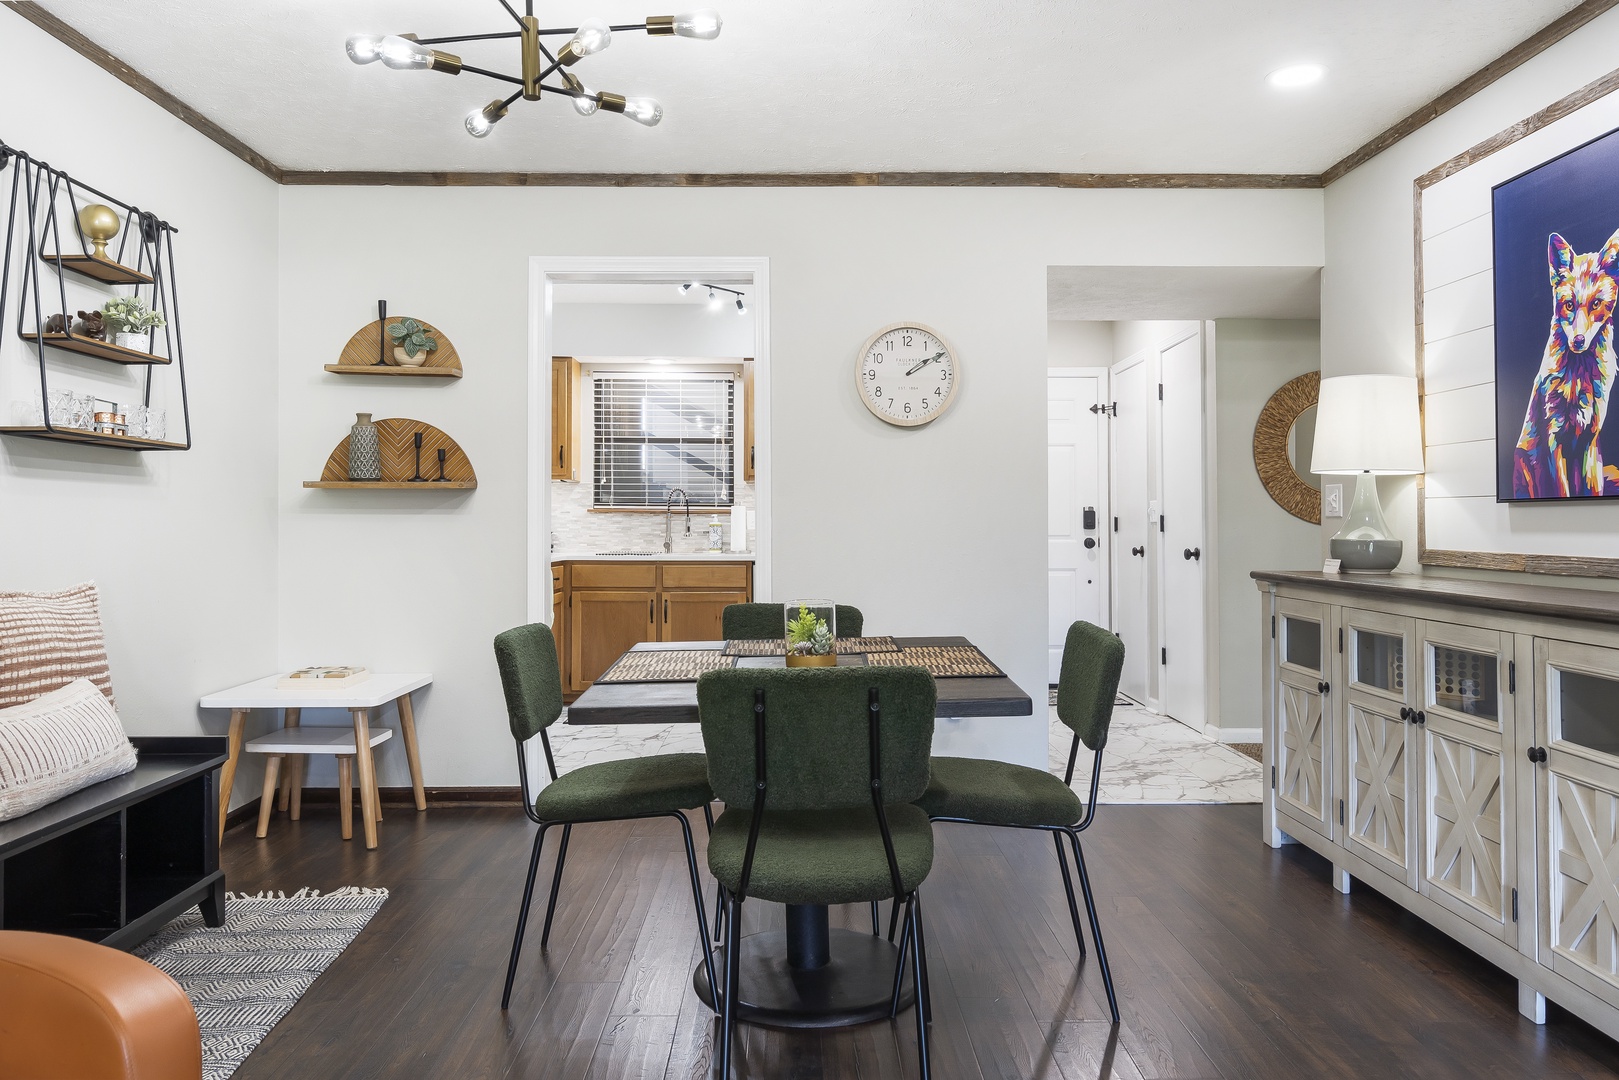 Gather for meals together at the dining table, with seating for 4